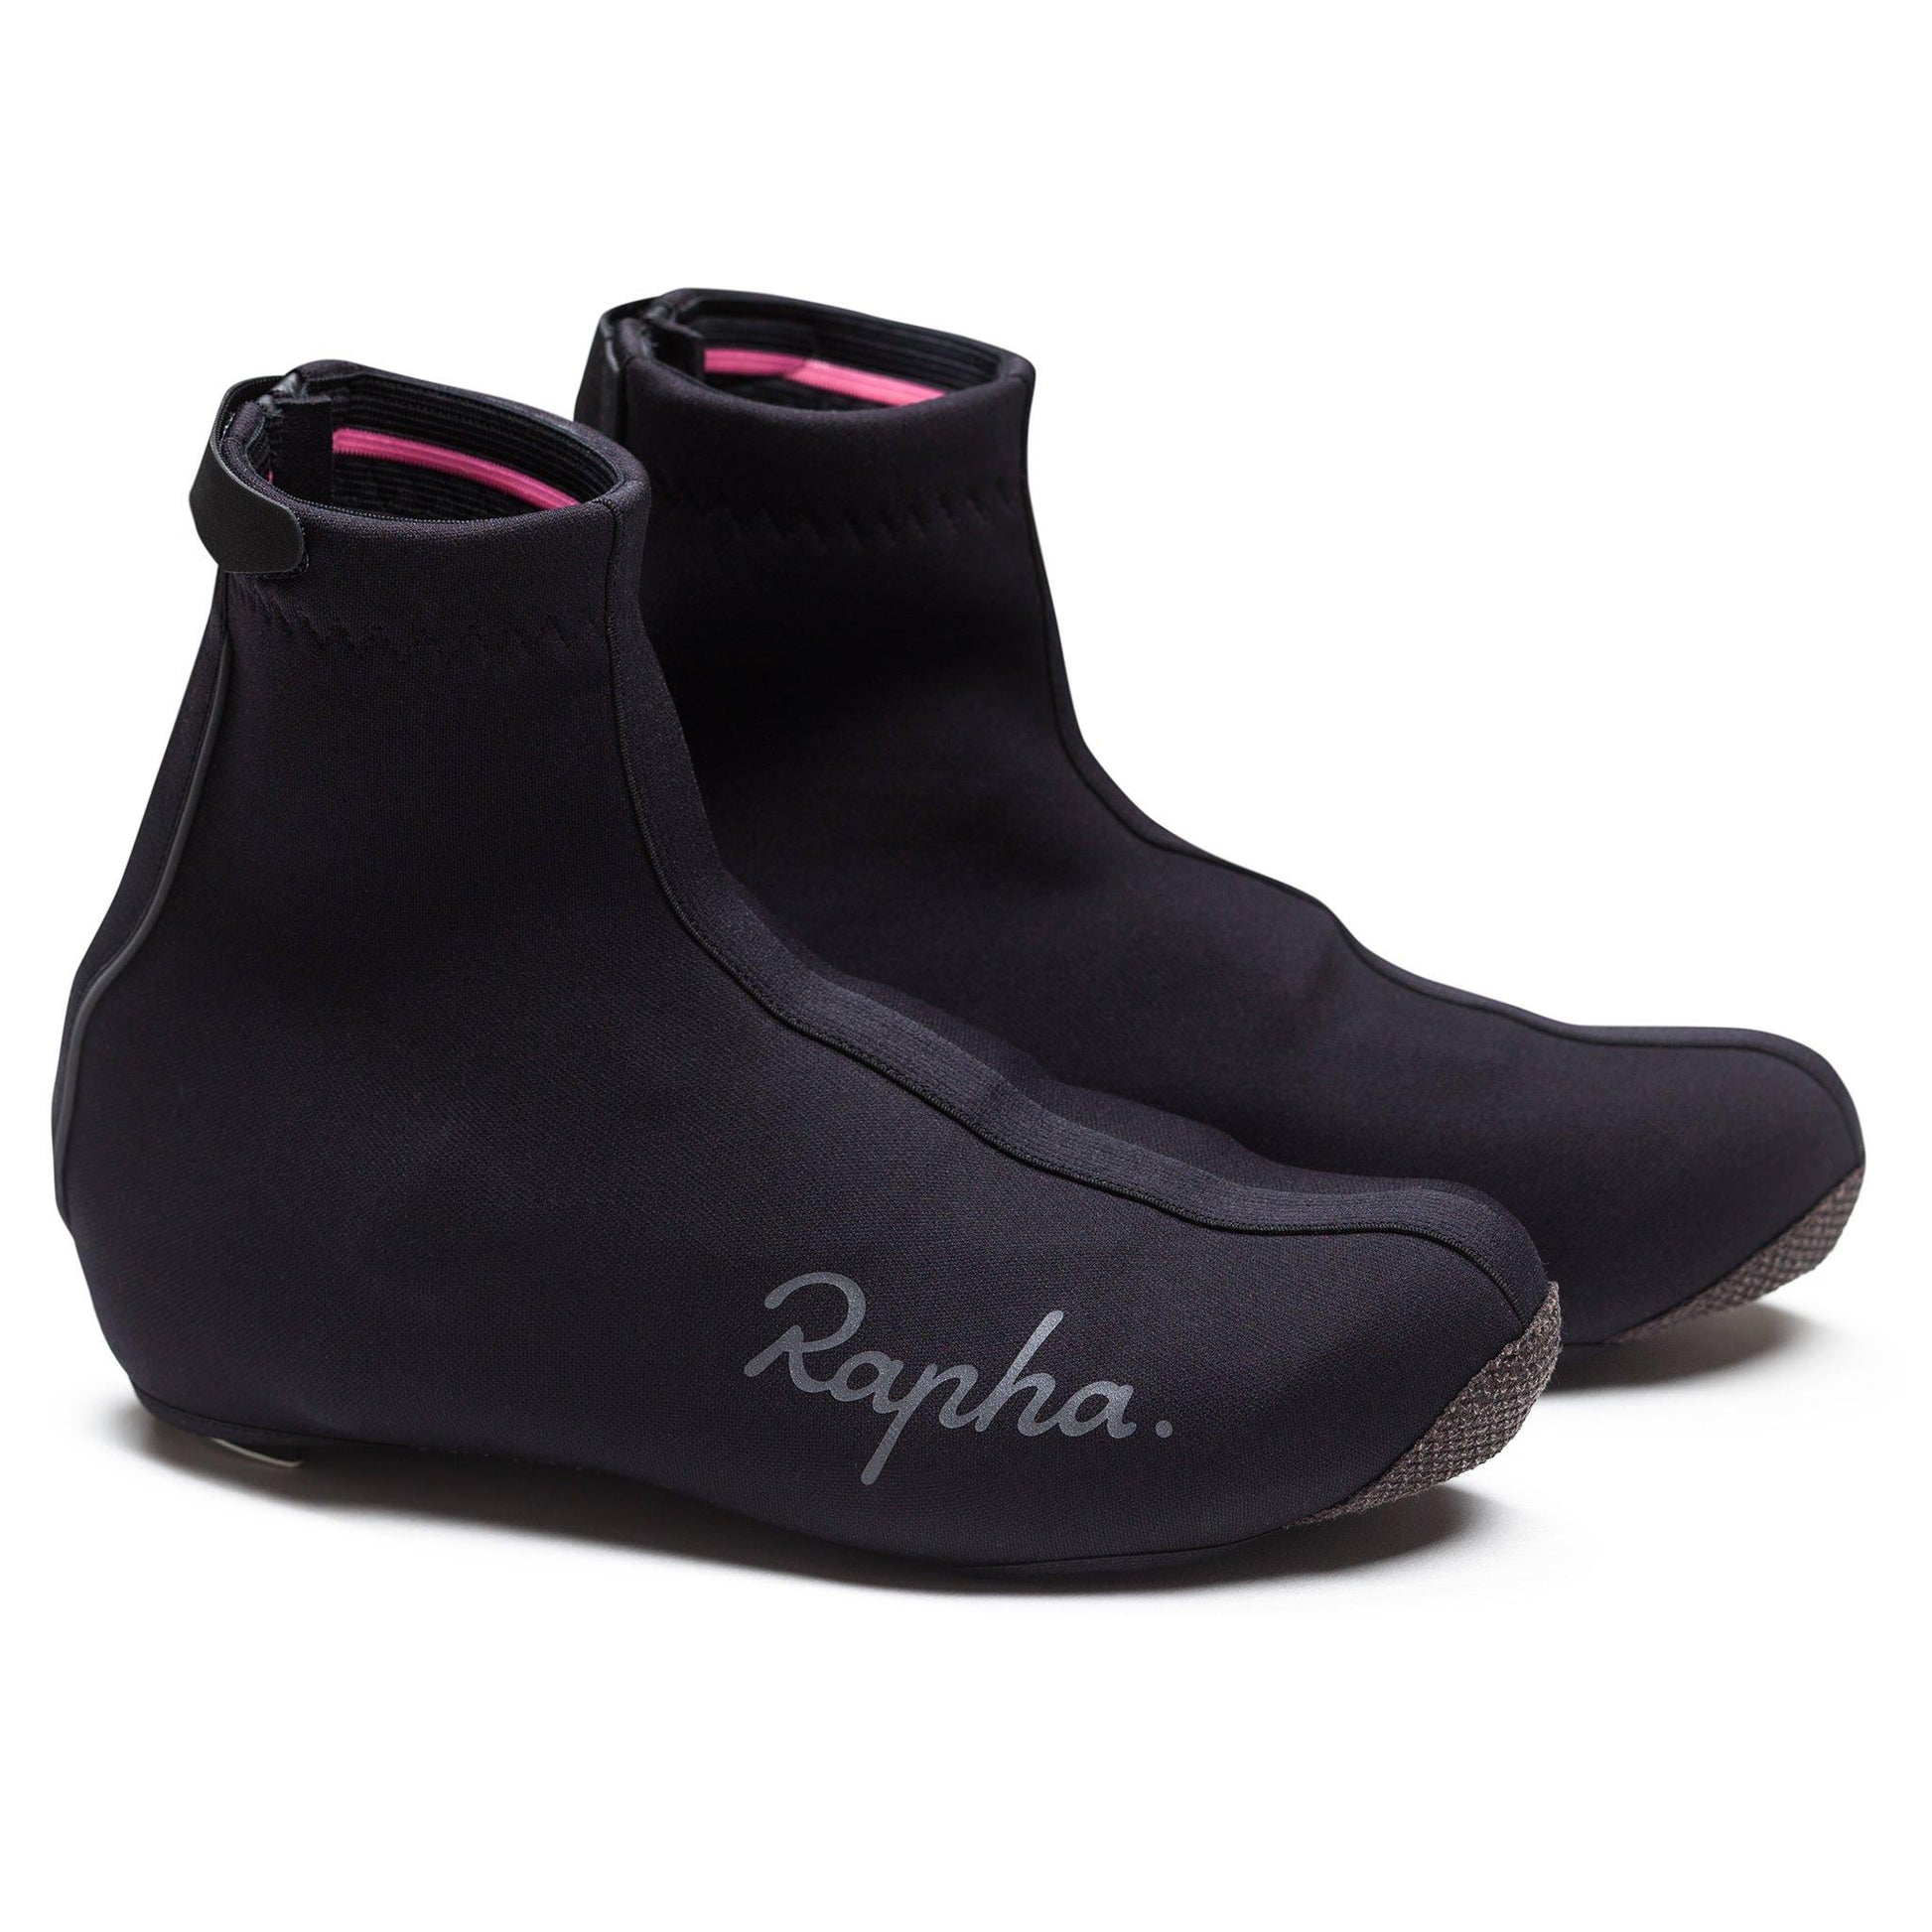 Rapha Unisex Overshoes - Black buy online at Woolys Wheels Sydney with free delivery